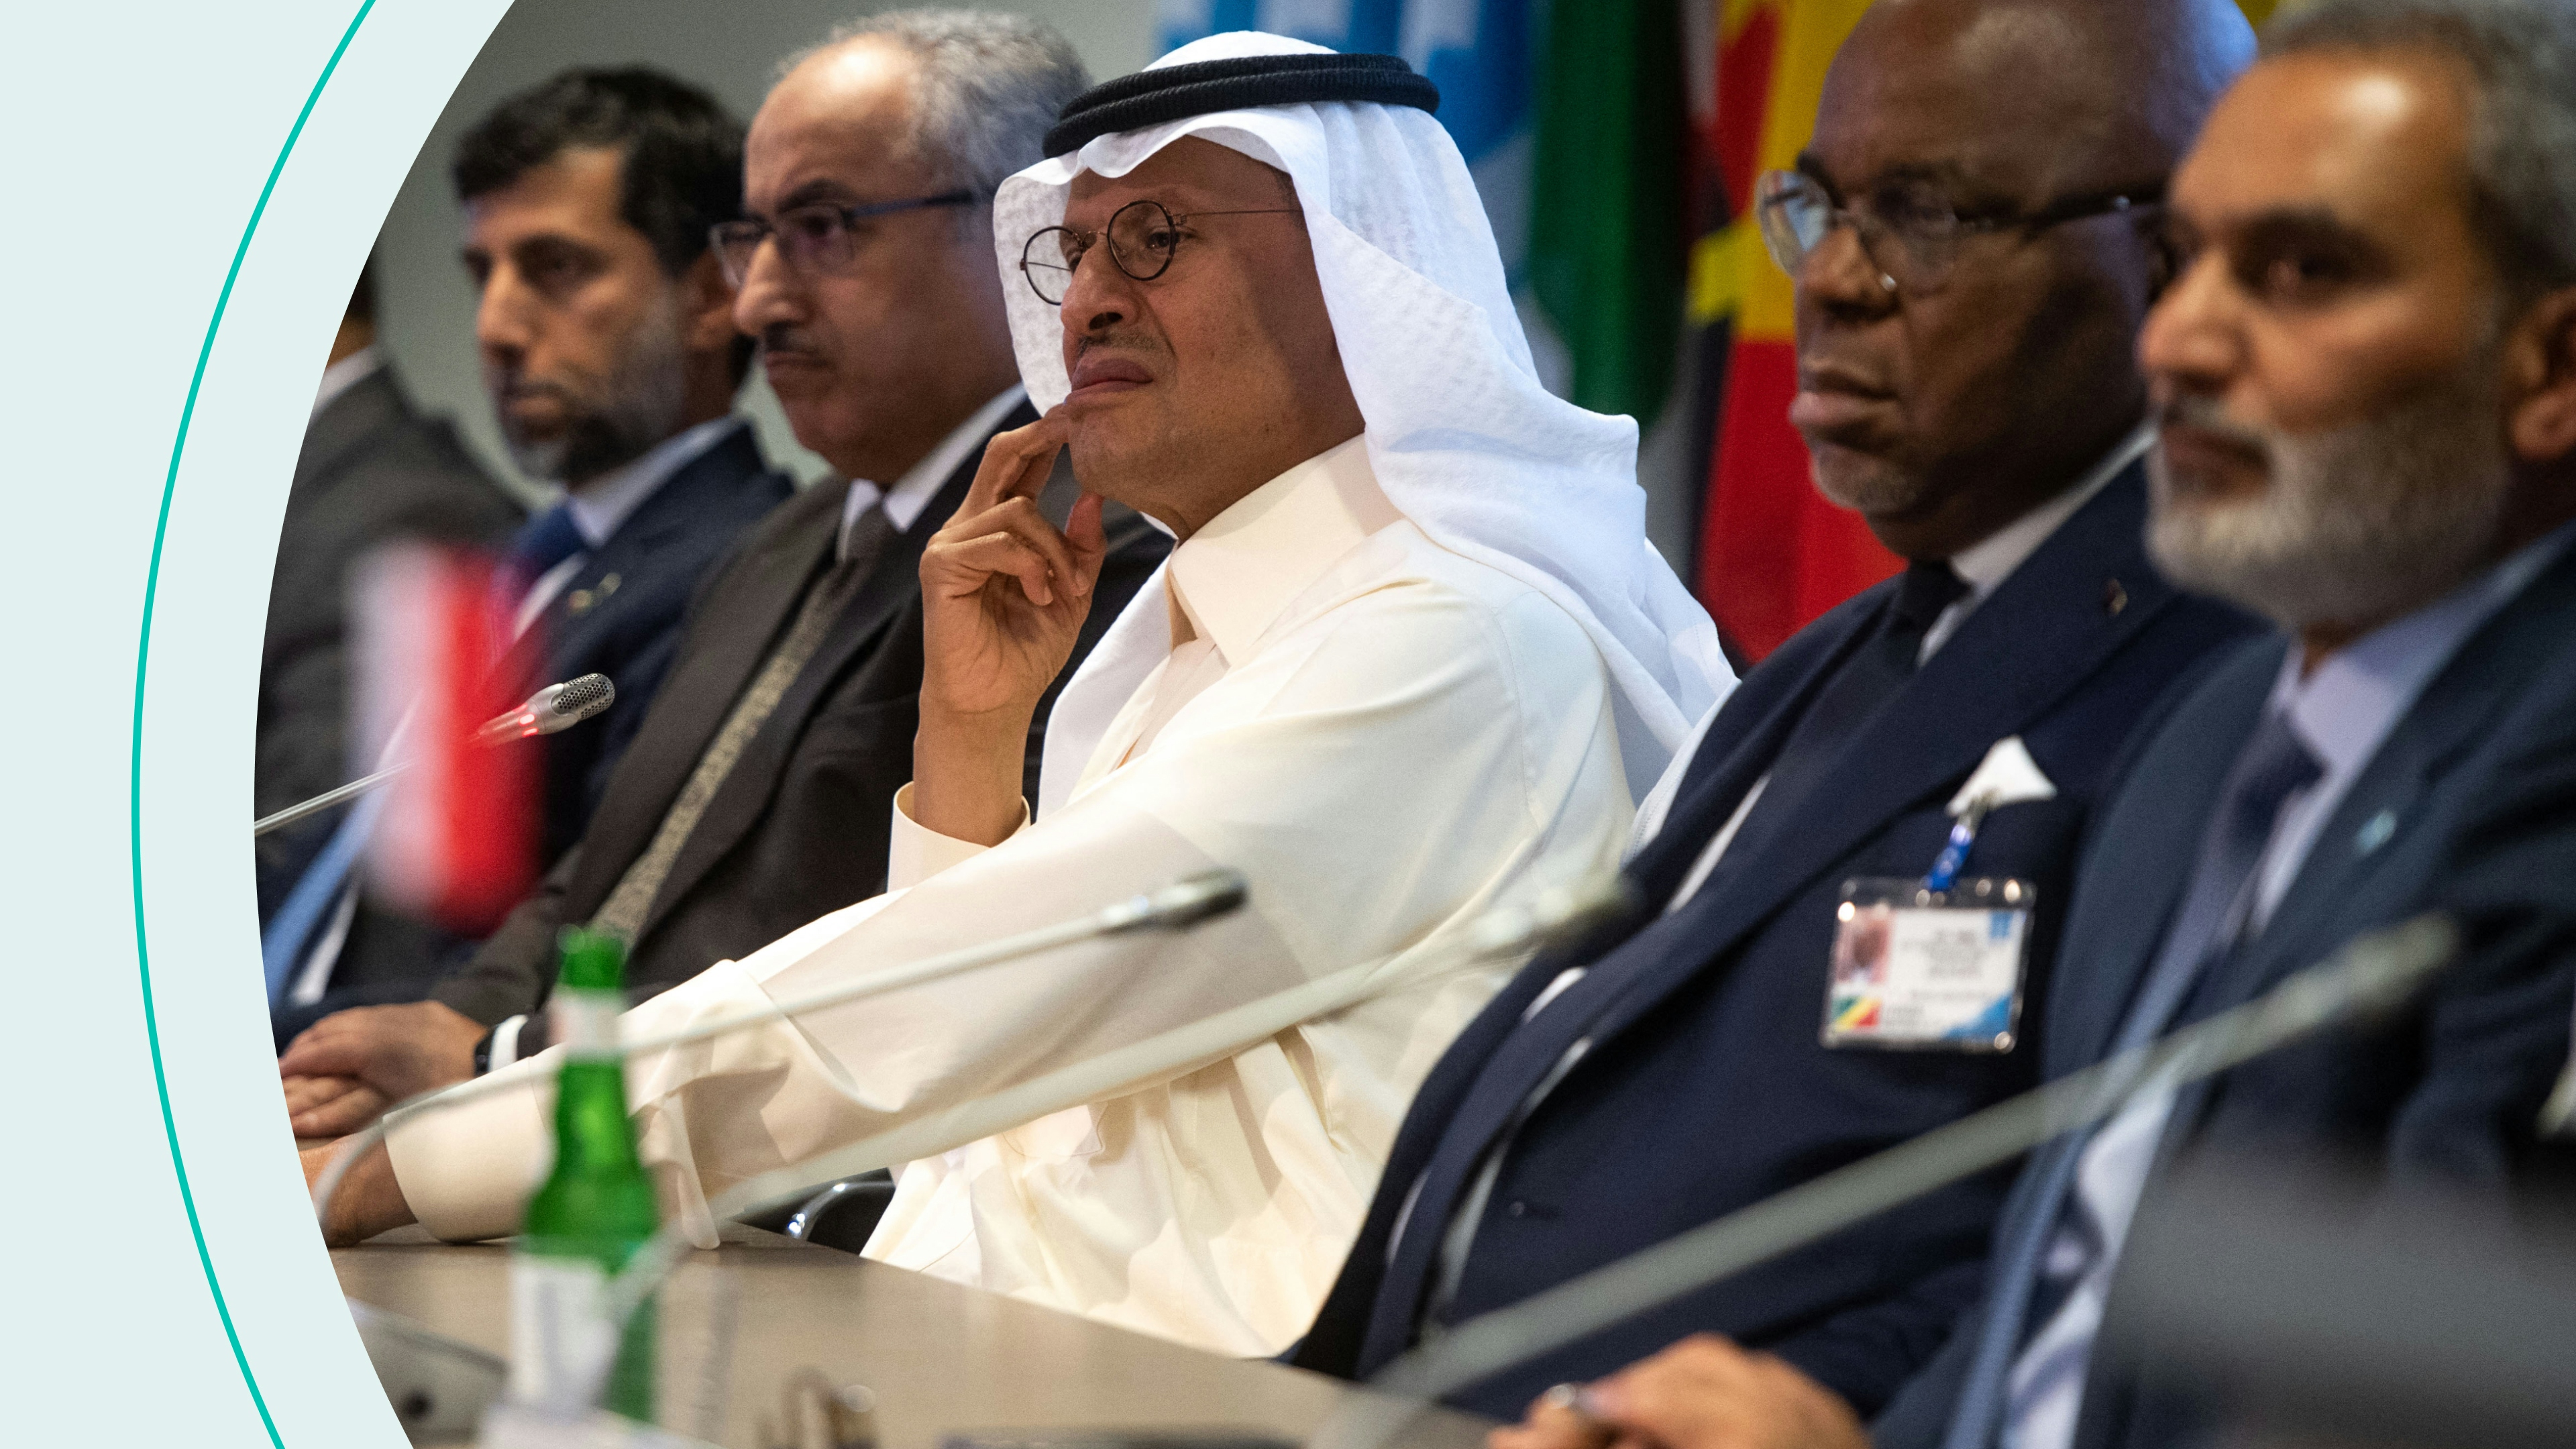 Saudi Arabia's Minister of Energy Abdulaziz bin Salman looks on during a press conference after the 45th Joint Ministerial Monitoring Committee and the 33rd OPEC and non-OPEC Ministerial Meeting in Vienna, Austria, on October 5, 2022.